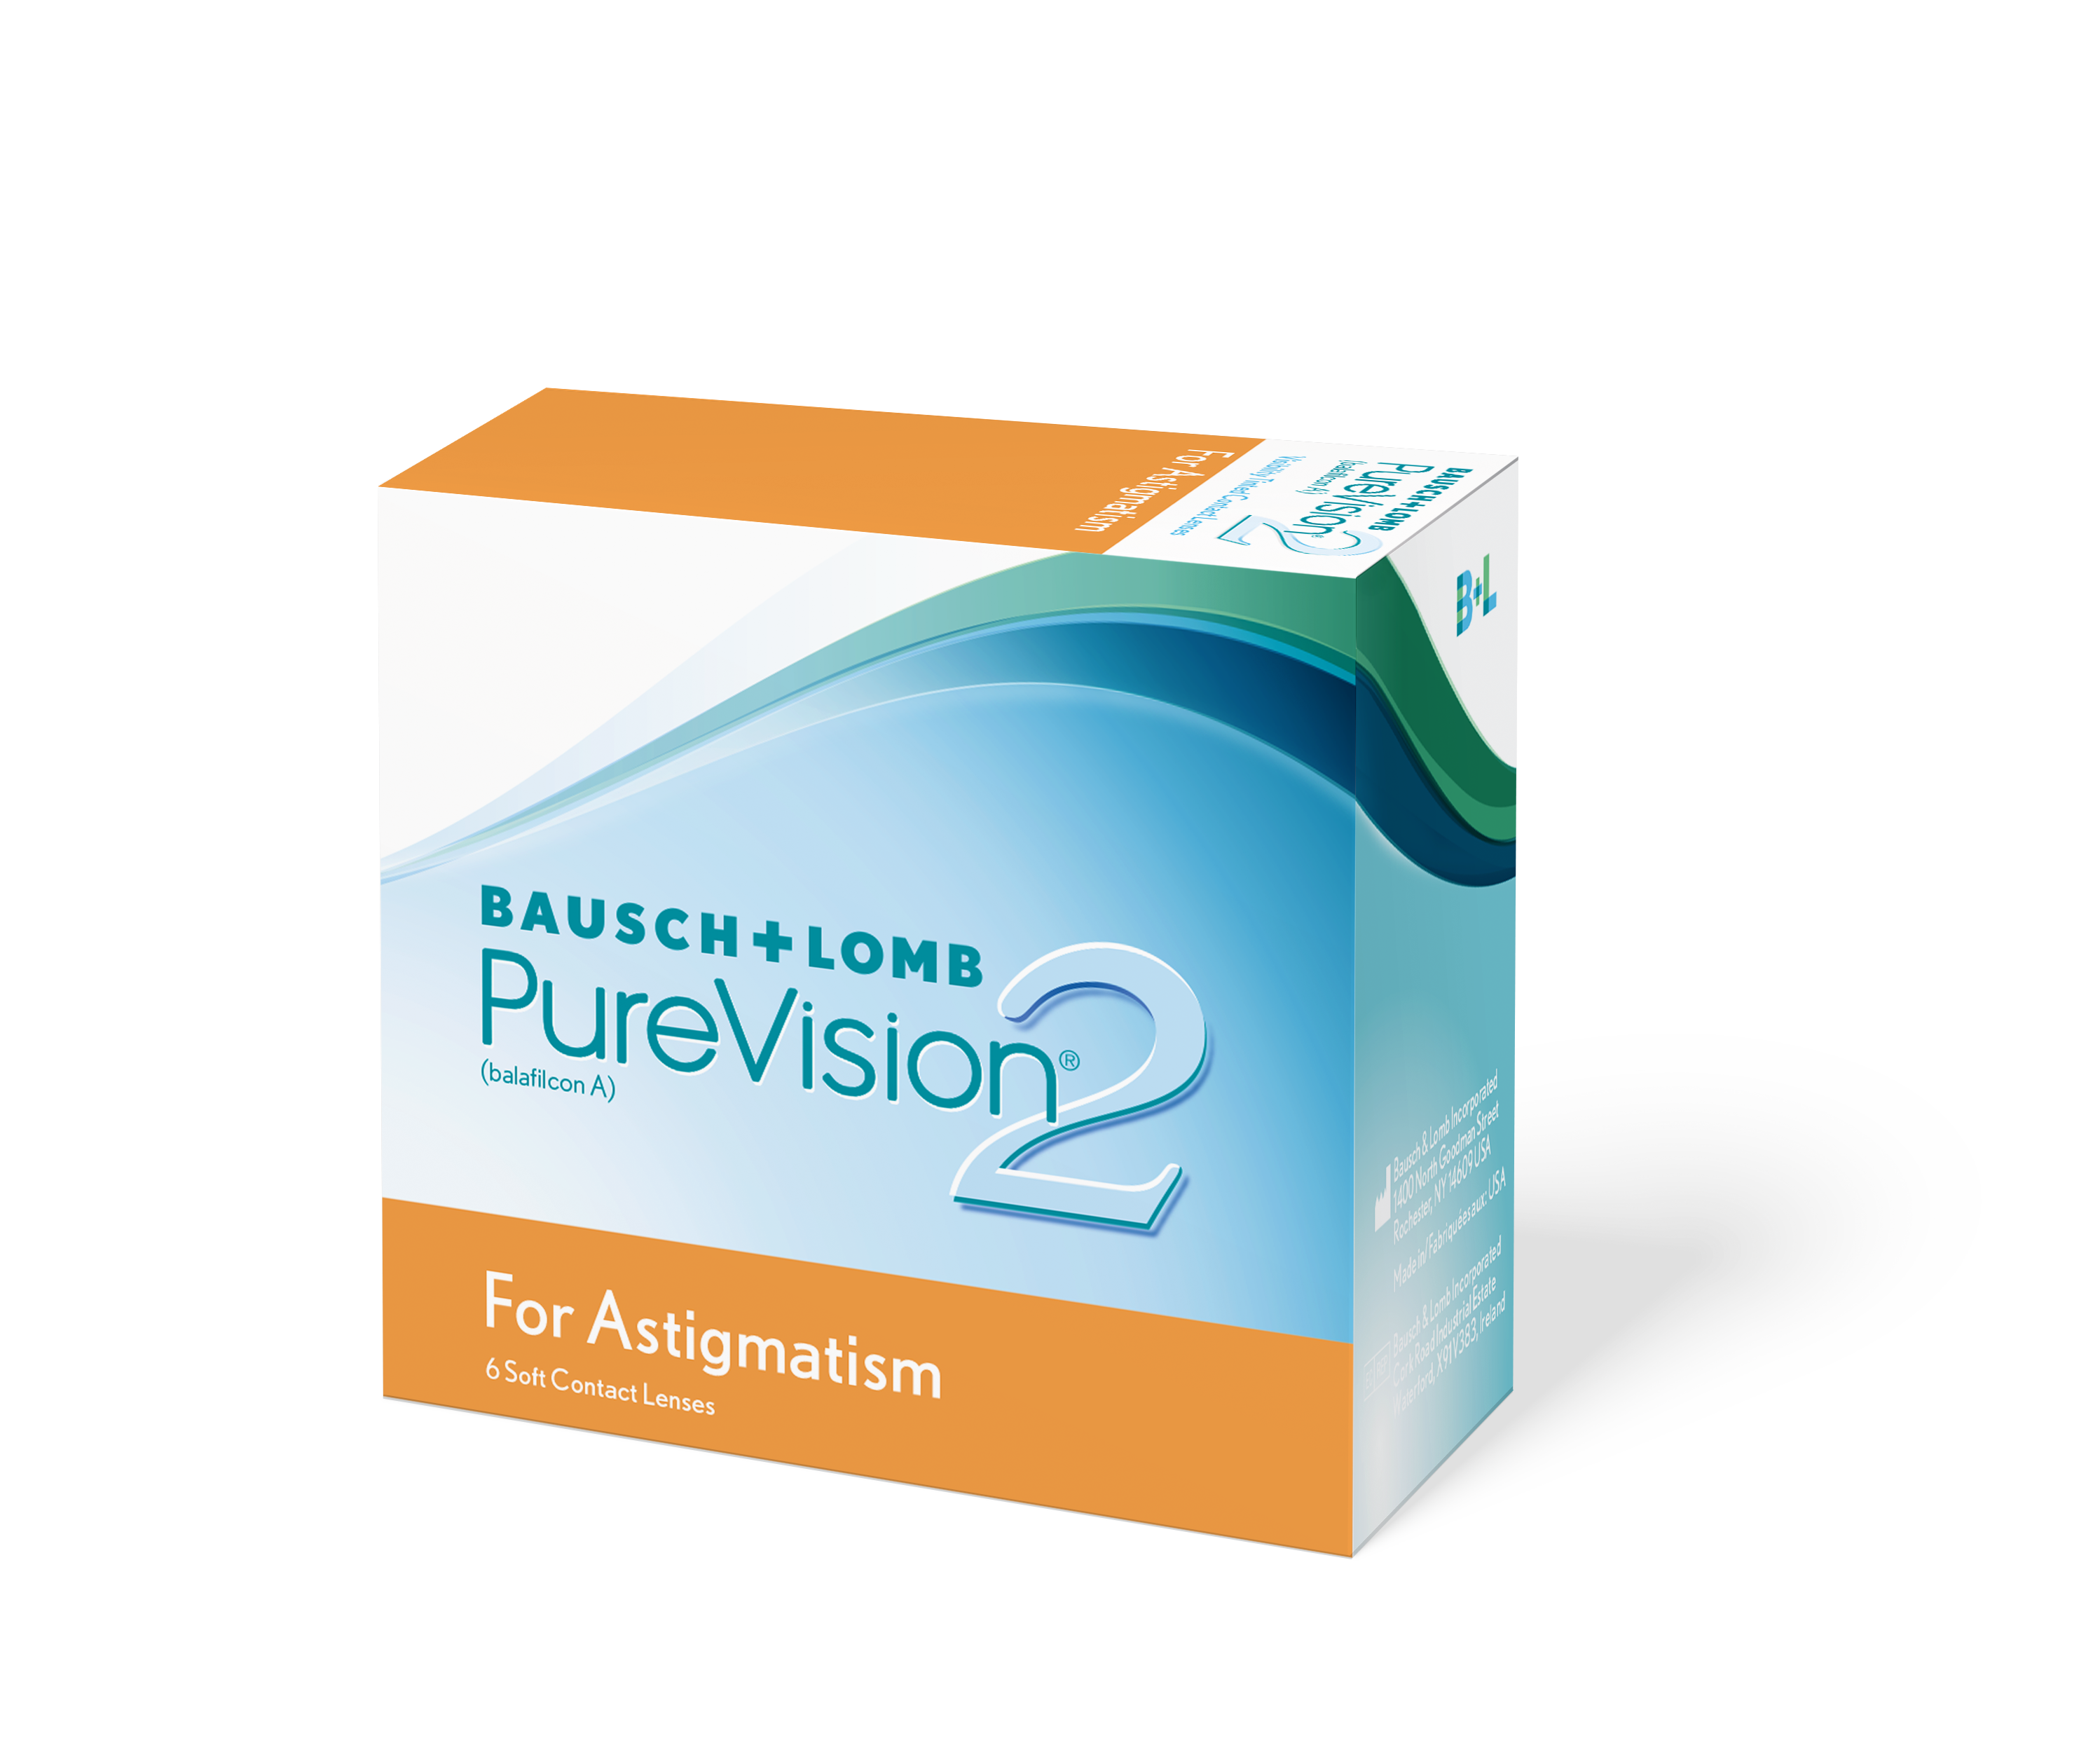 Pure Vision 2 HD for Astigmatism, Bausch & Lomb (6 Stk.)